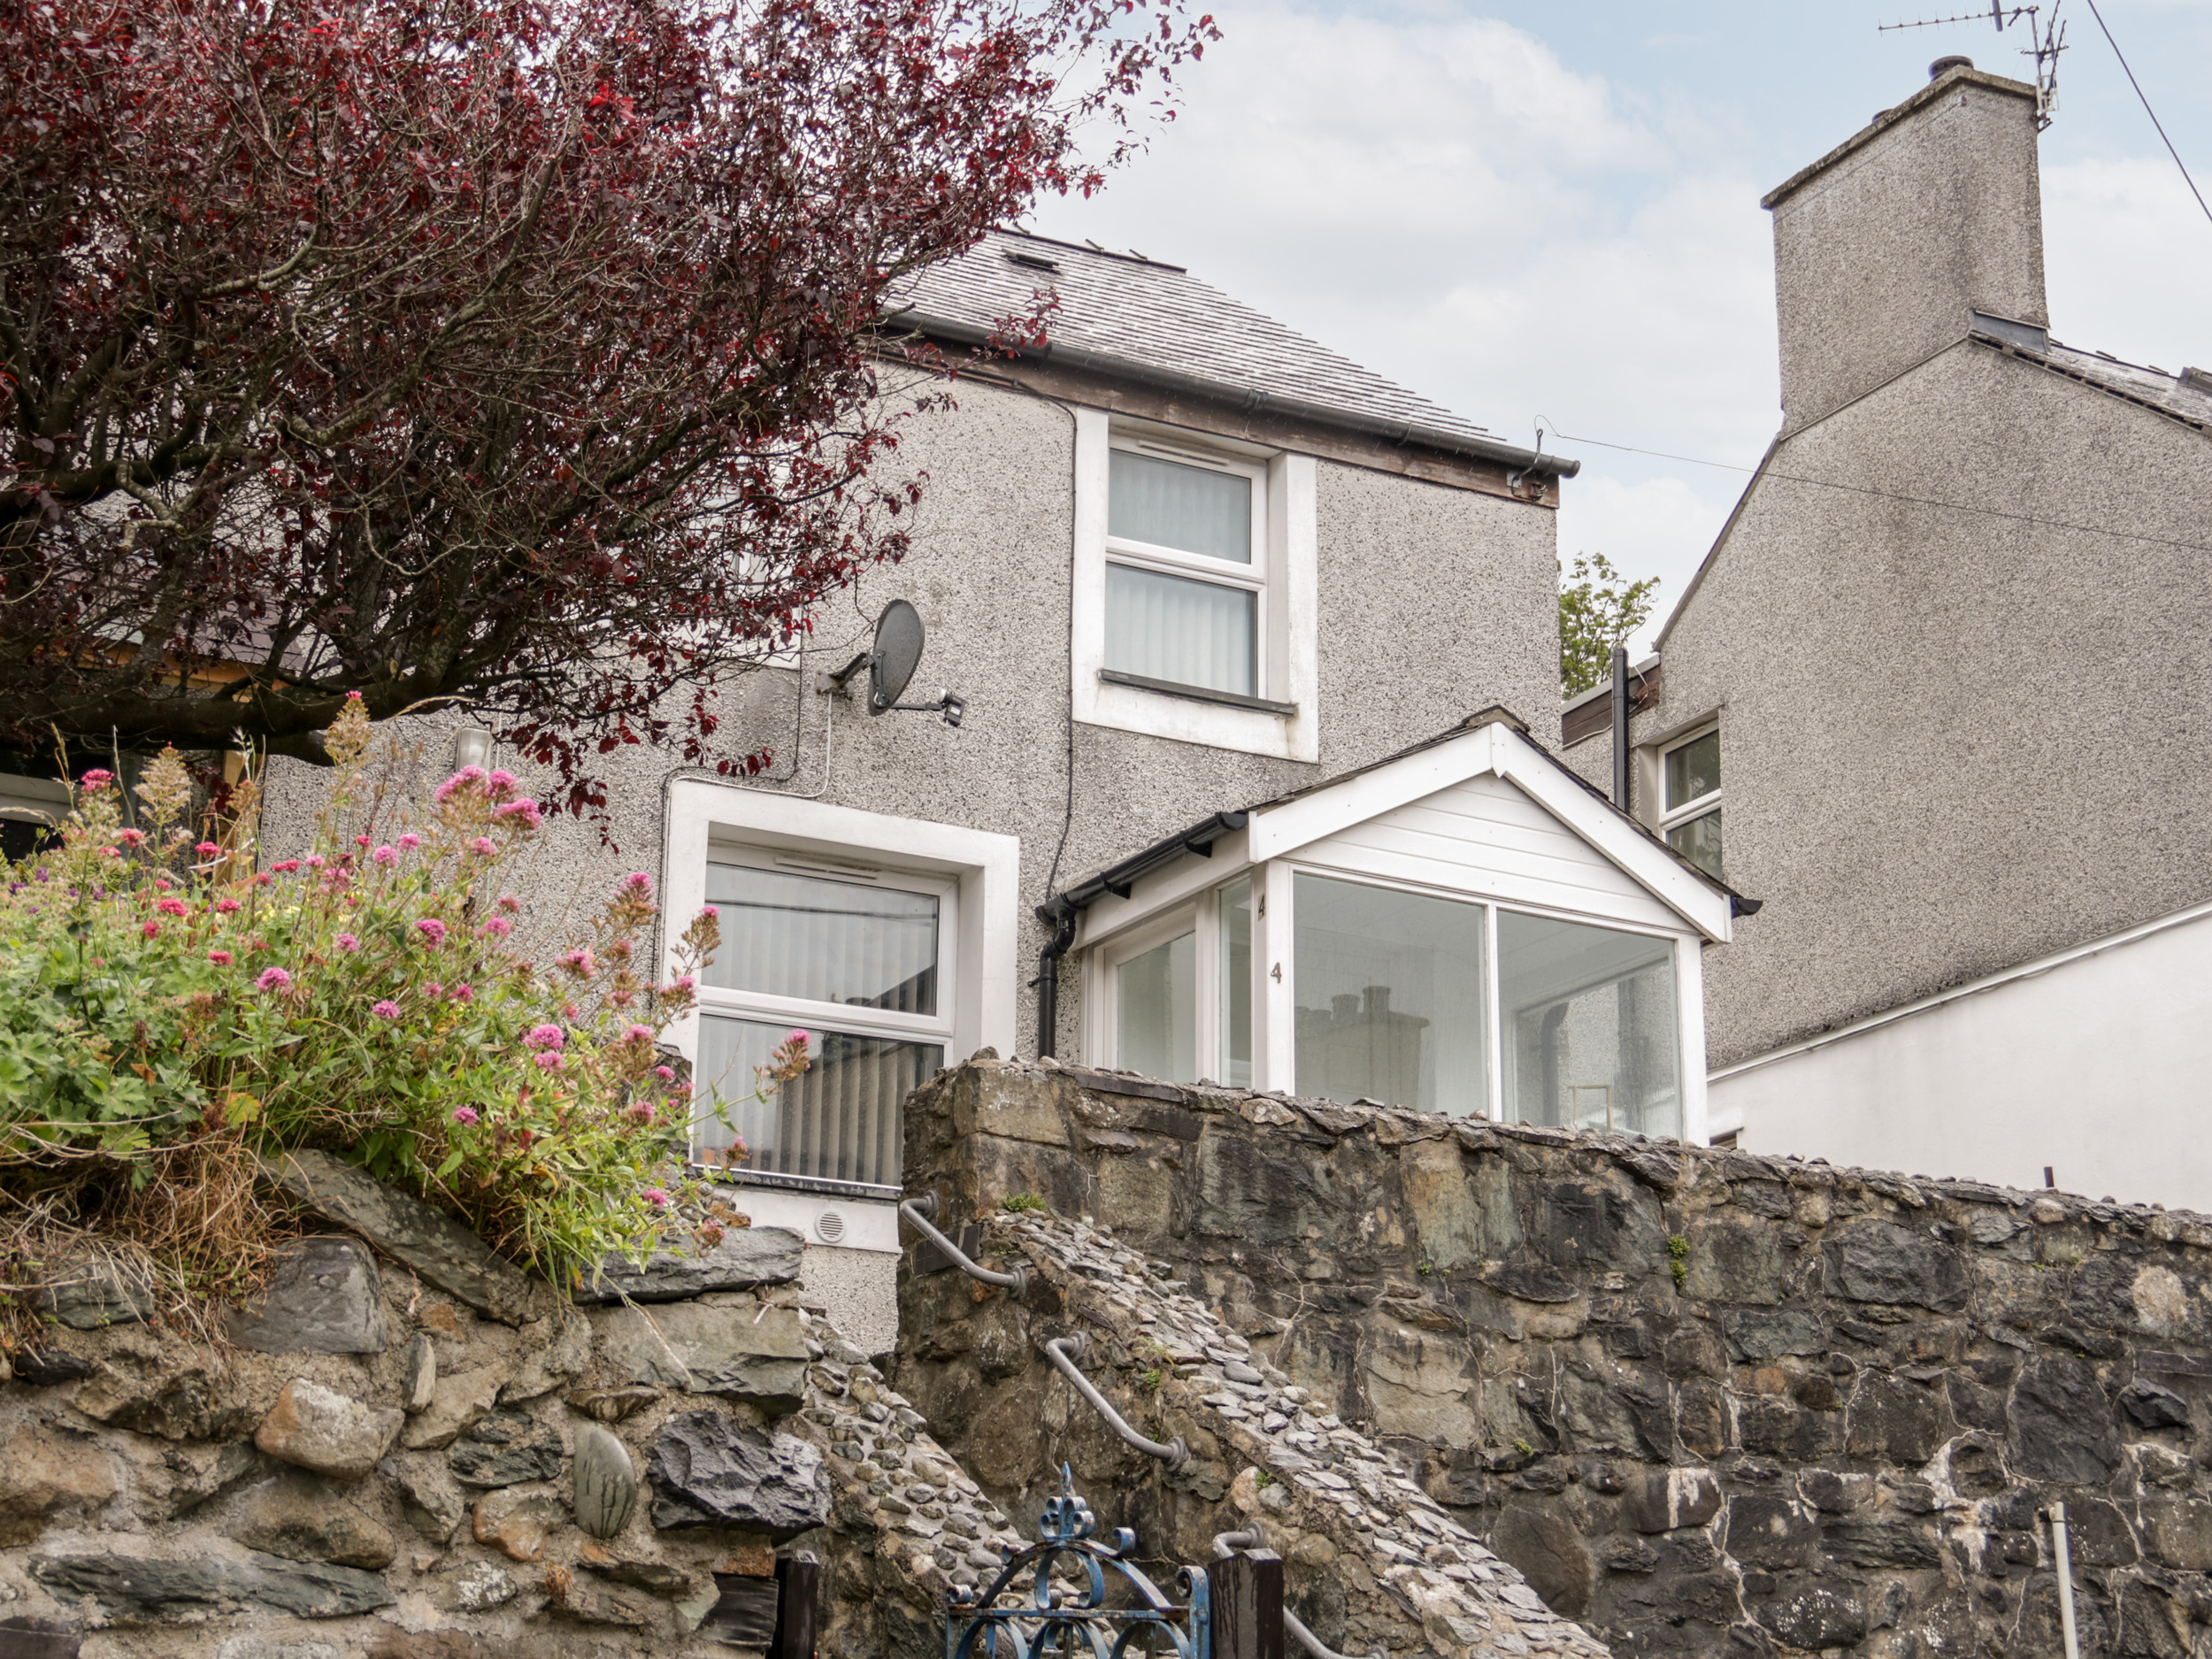 2 bedroom Cottage for rent in Narberth